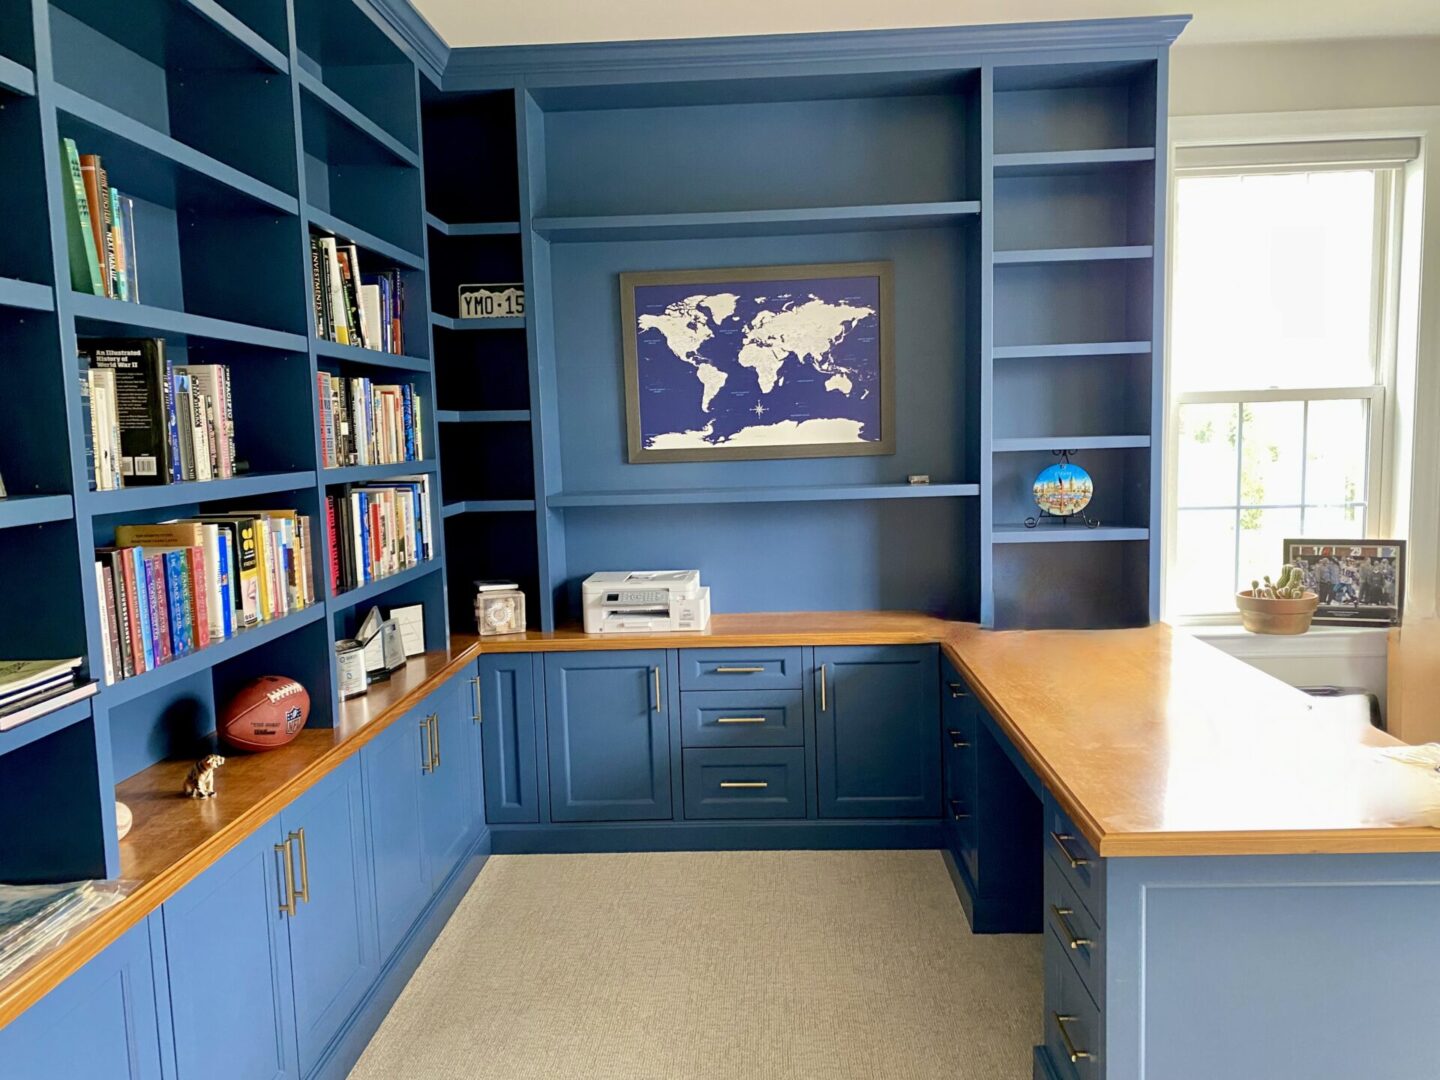 A room with blue cabinets and a world map on the wall.